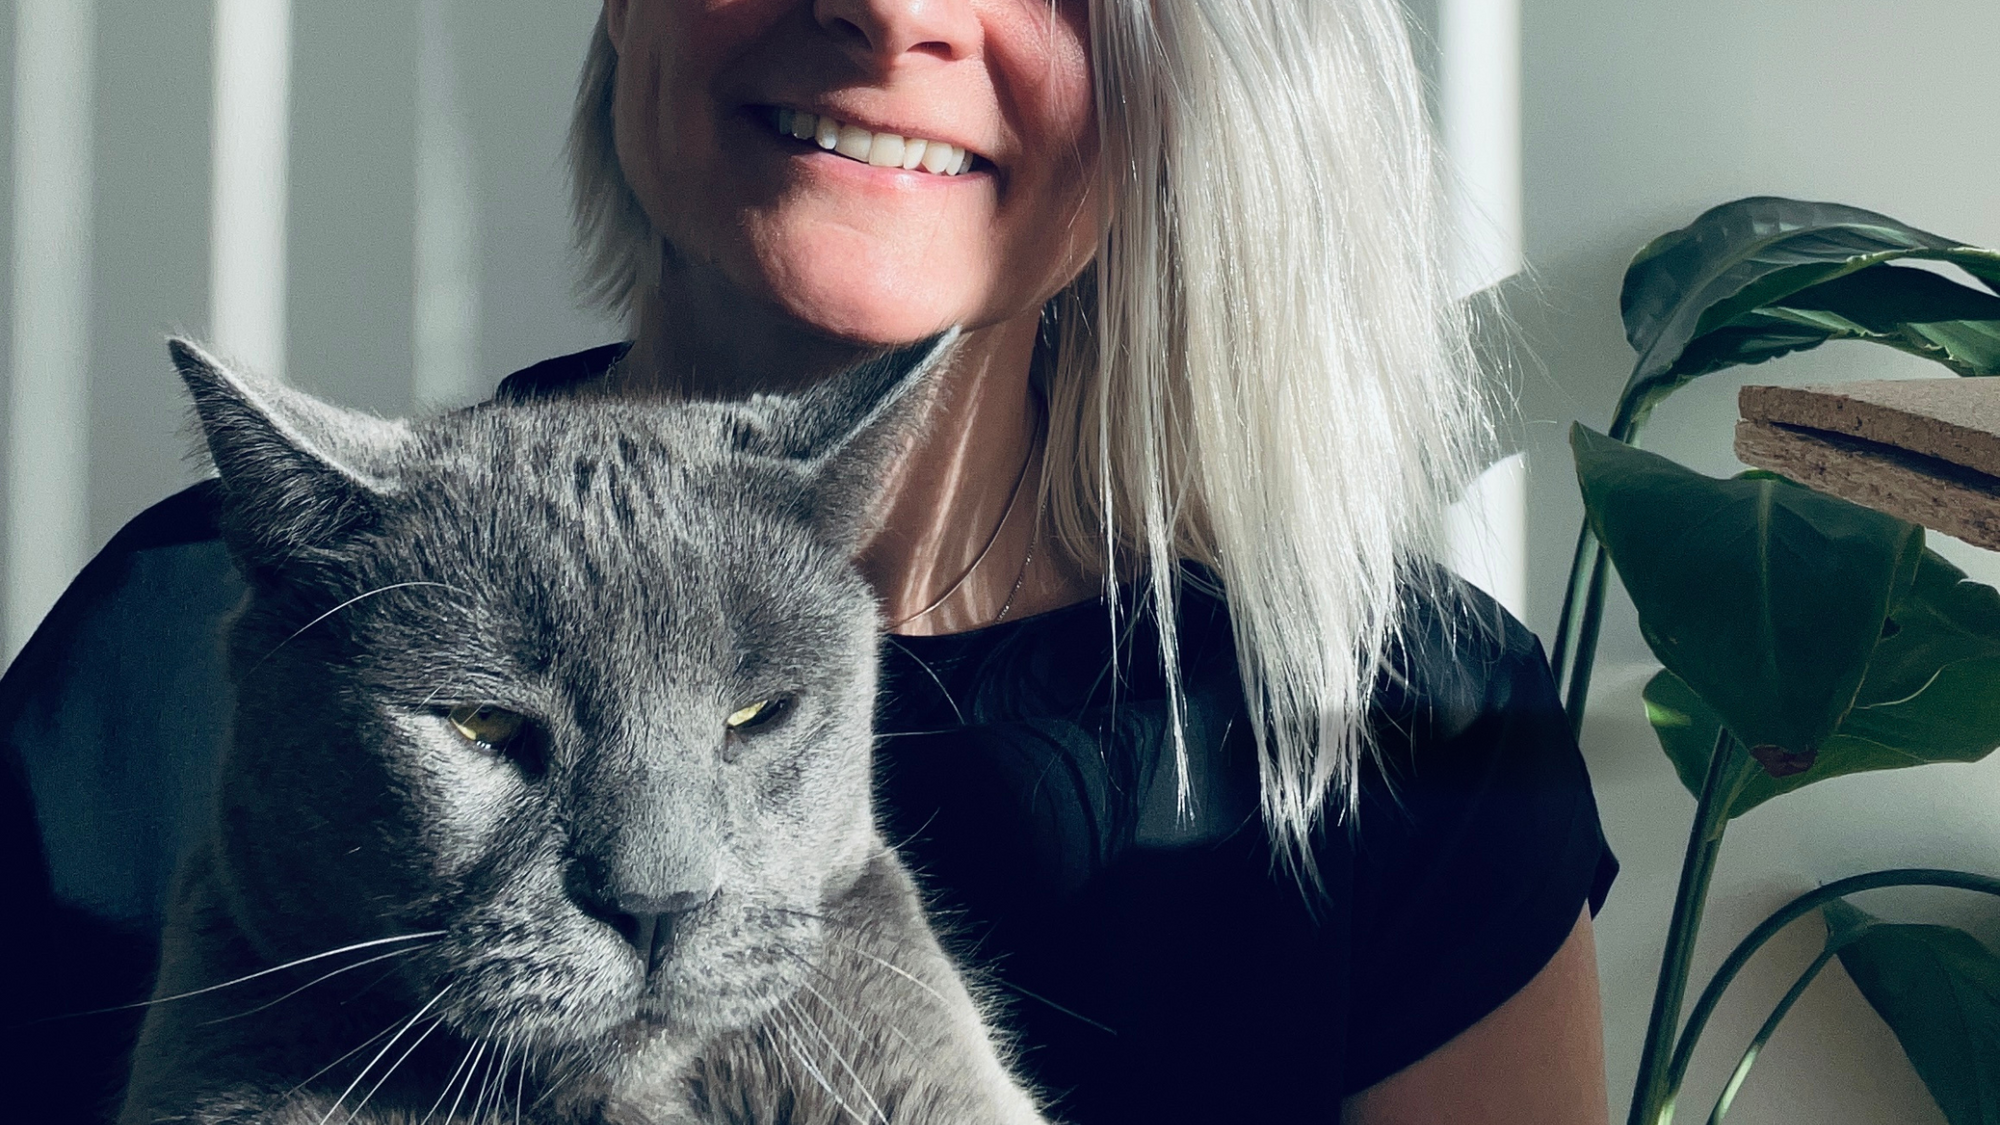 Malaika Boysen Haaning founder of Malaika New York is sitting with her cat Mr. Blob and wishing everyone a lovely galentines